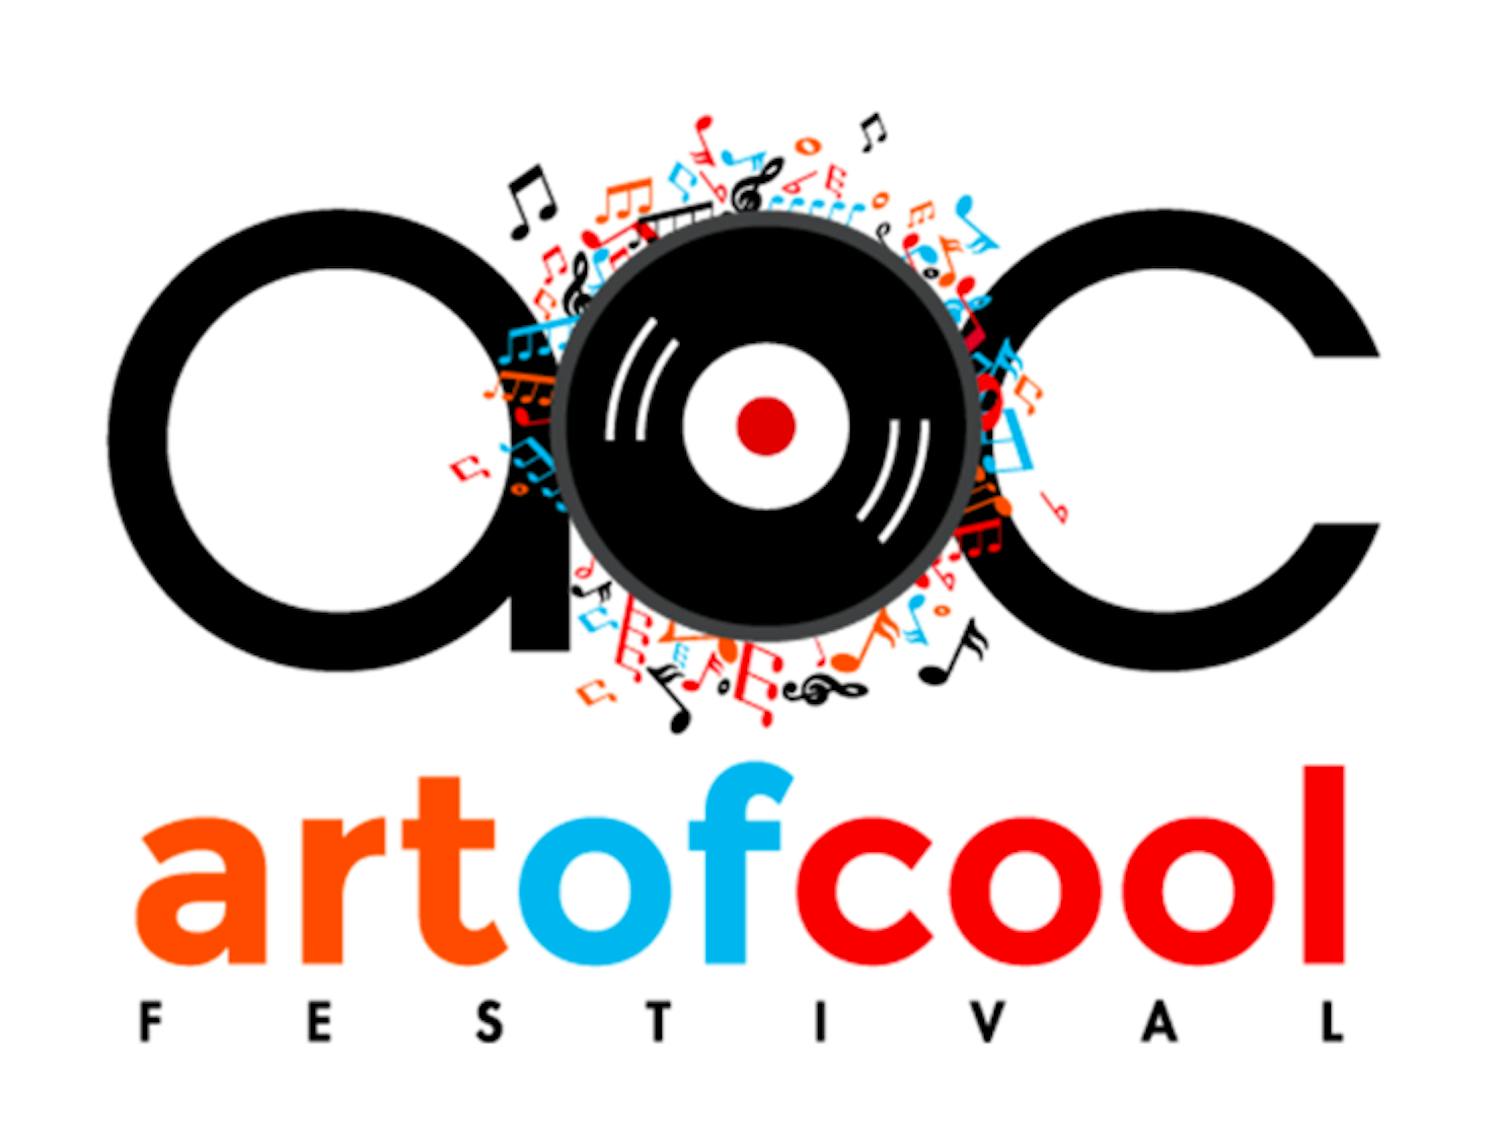 The graphic of the Art Of Cool festival. Photo courtesy of Sulaiman Mausi.